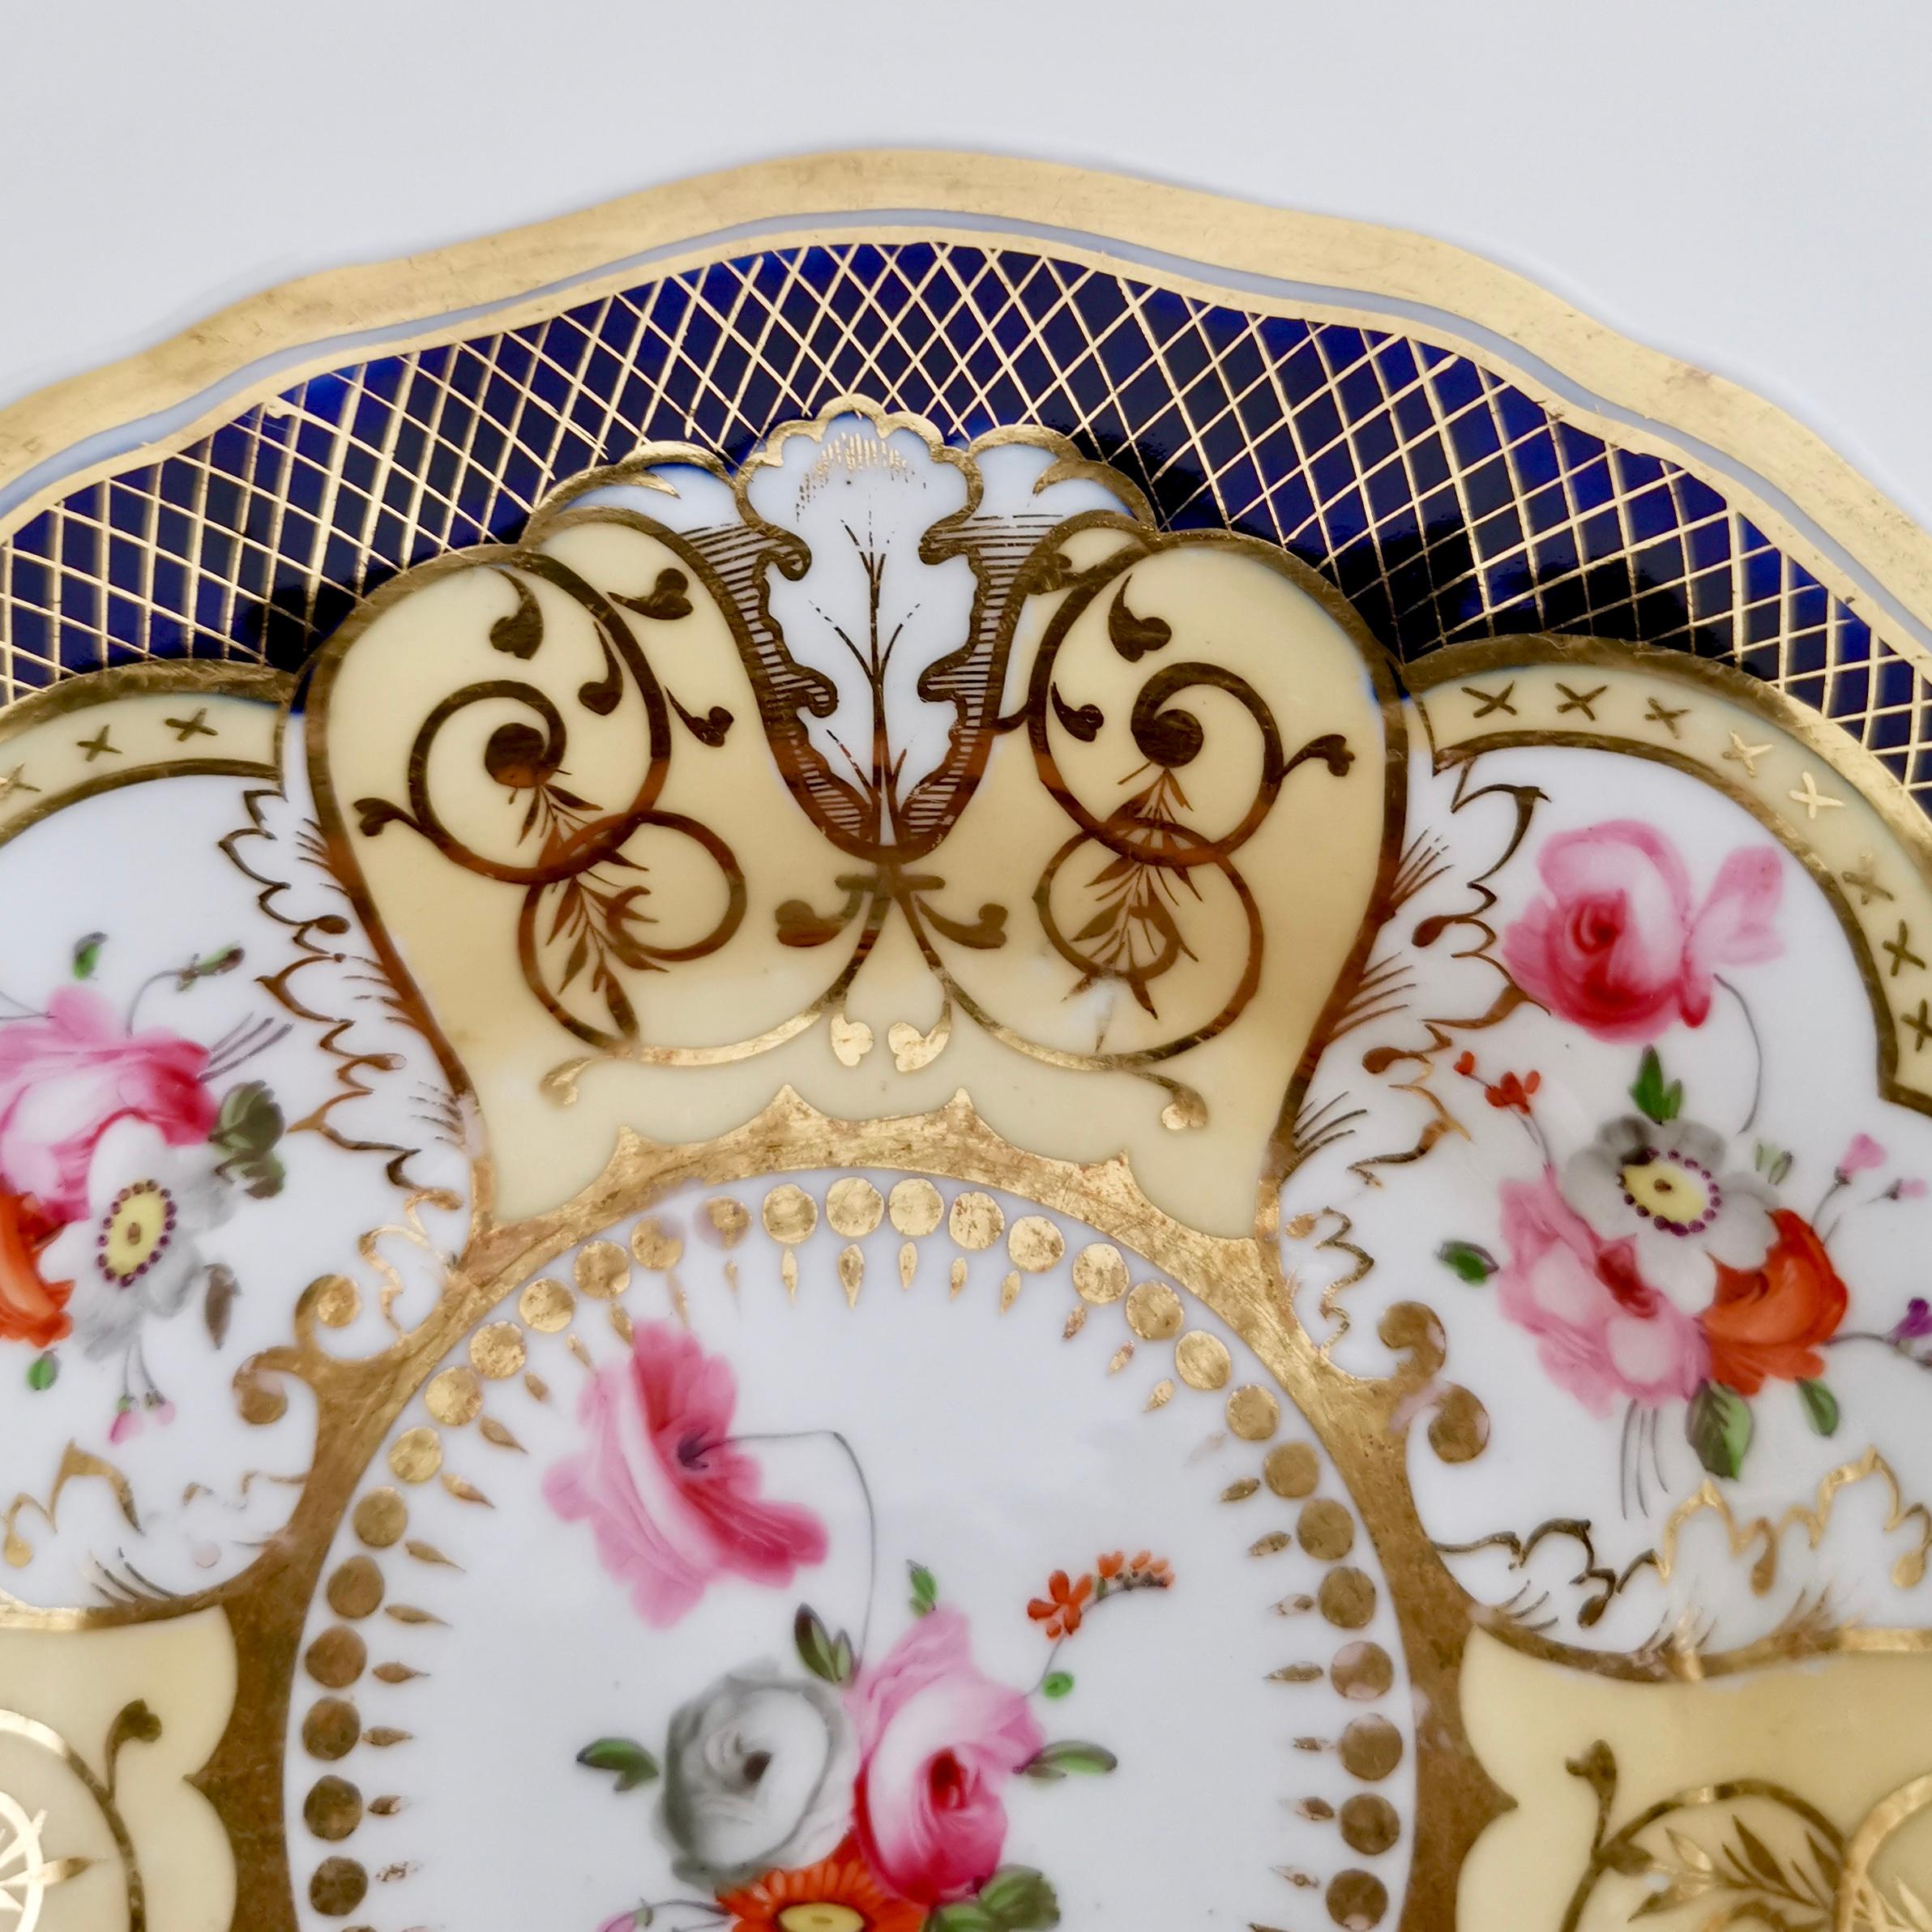 Porcelain Yates Coffee Cup, Cobalt Blue, Gilt and Flowers, Pattern No. 1033, 1820-1825